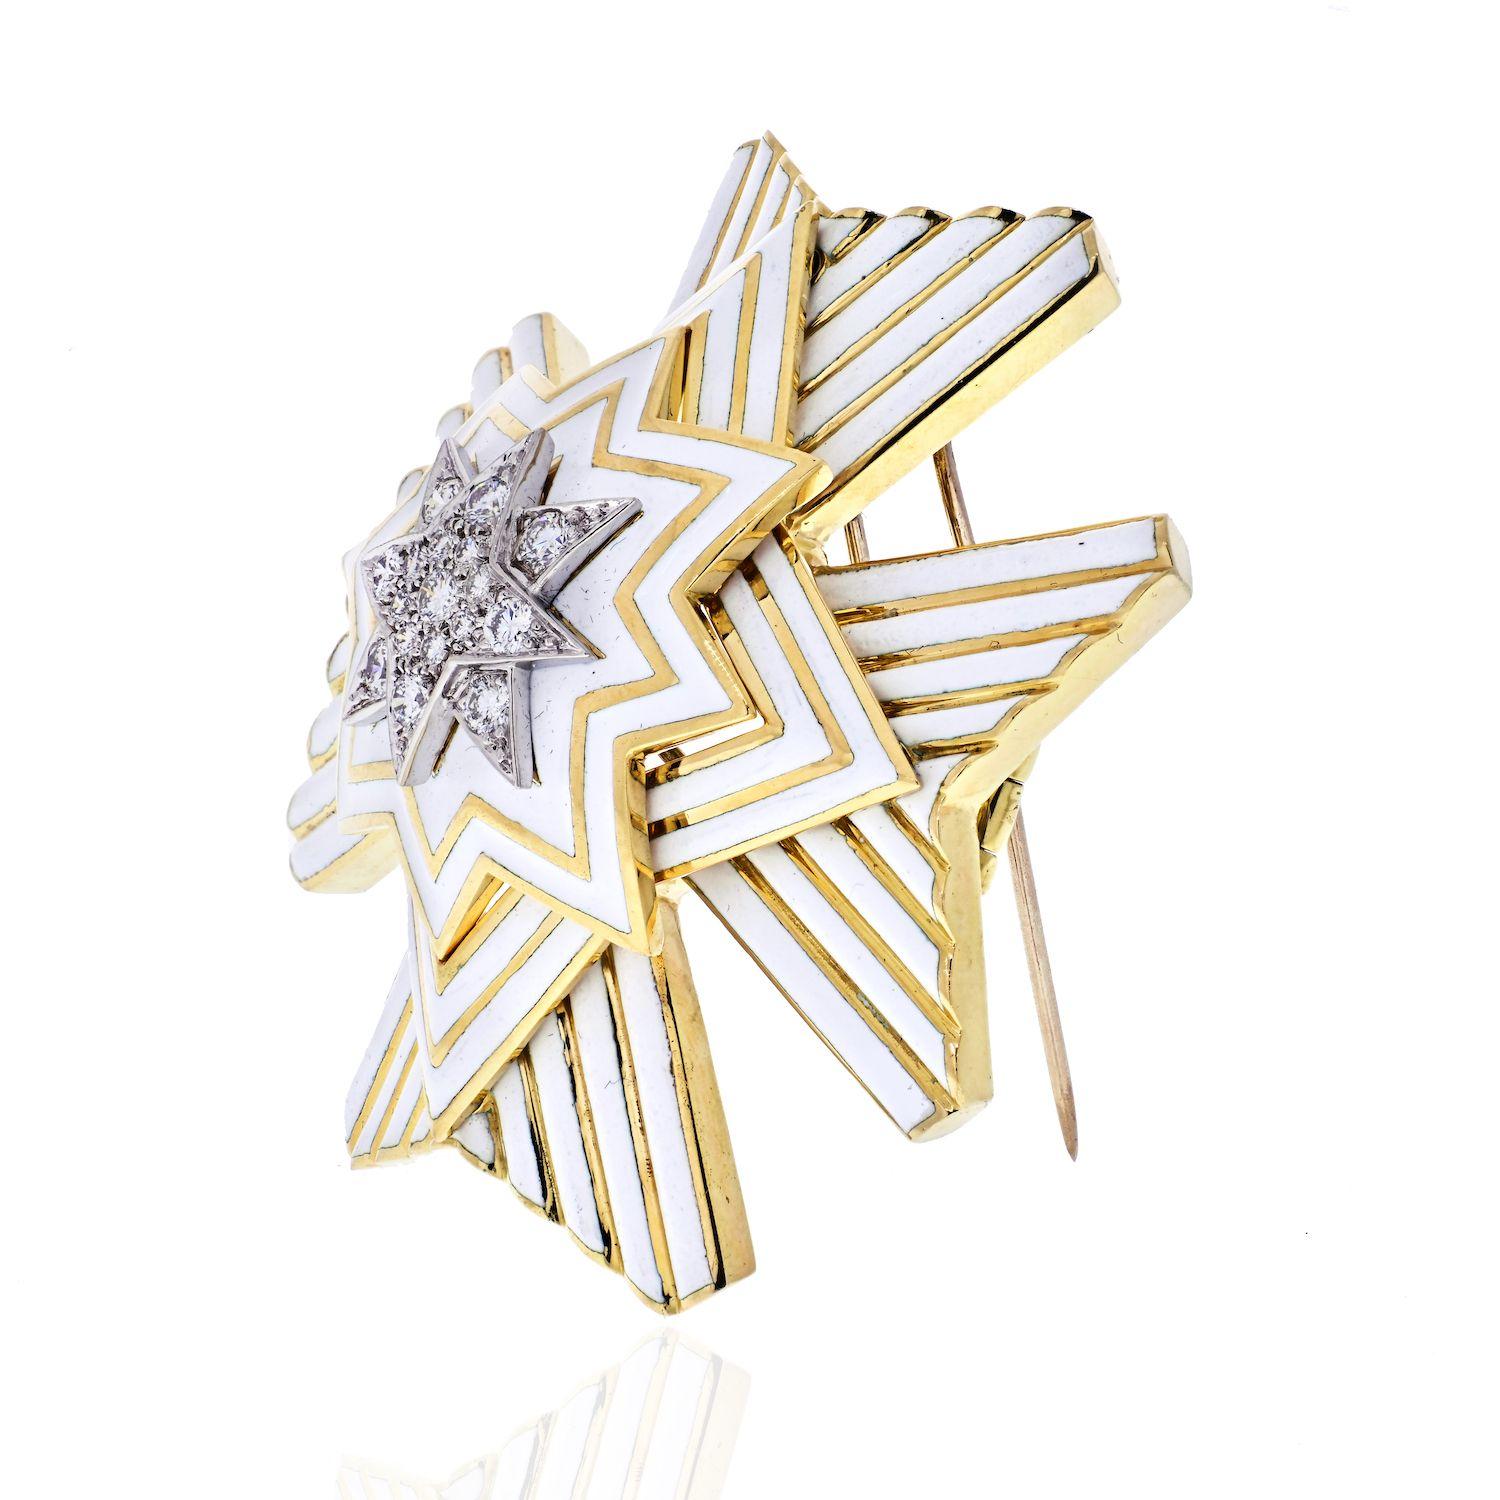 This important vintage David Webb Maltese cross pin/pendant is remarkable. It is composed of 18K yellow gold and platinum with white enamel and diamonds. 
This brooch can be worn as a pendant as well as a brooch and it is large 56mm wide x 56mm